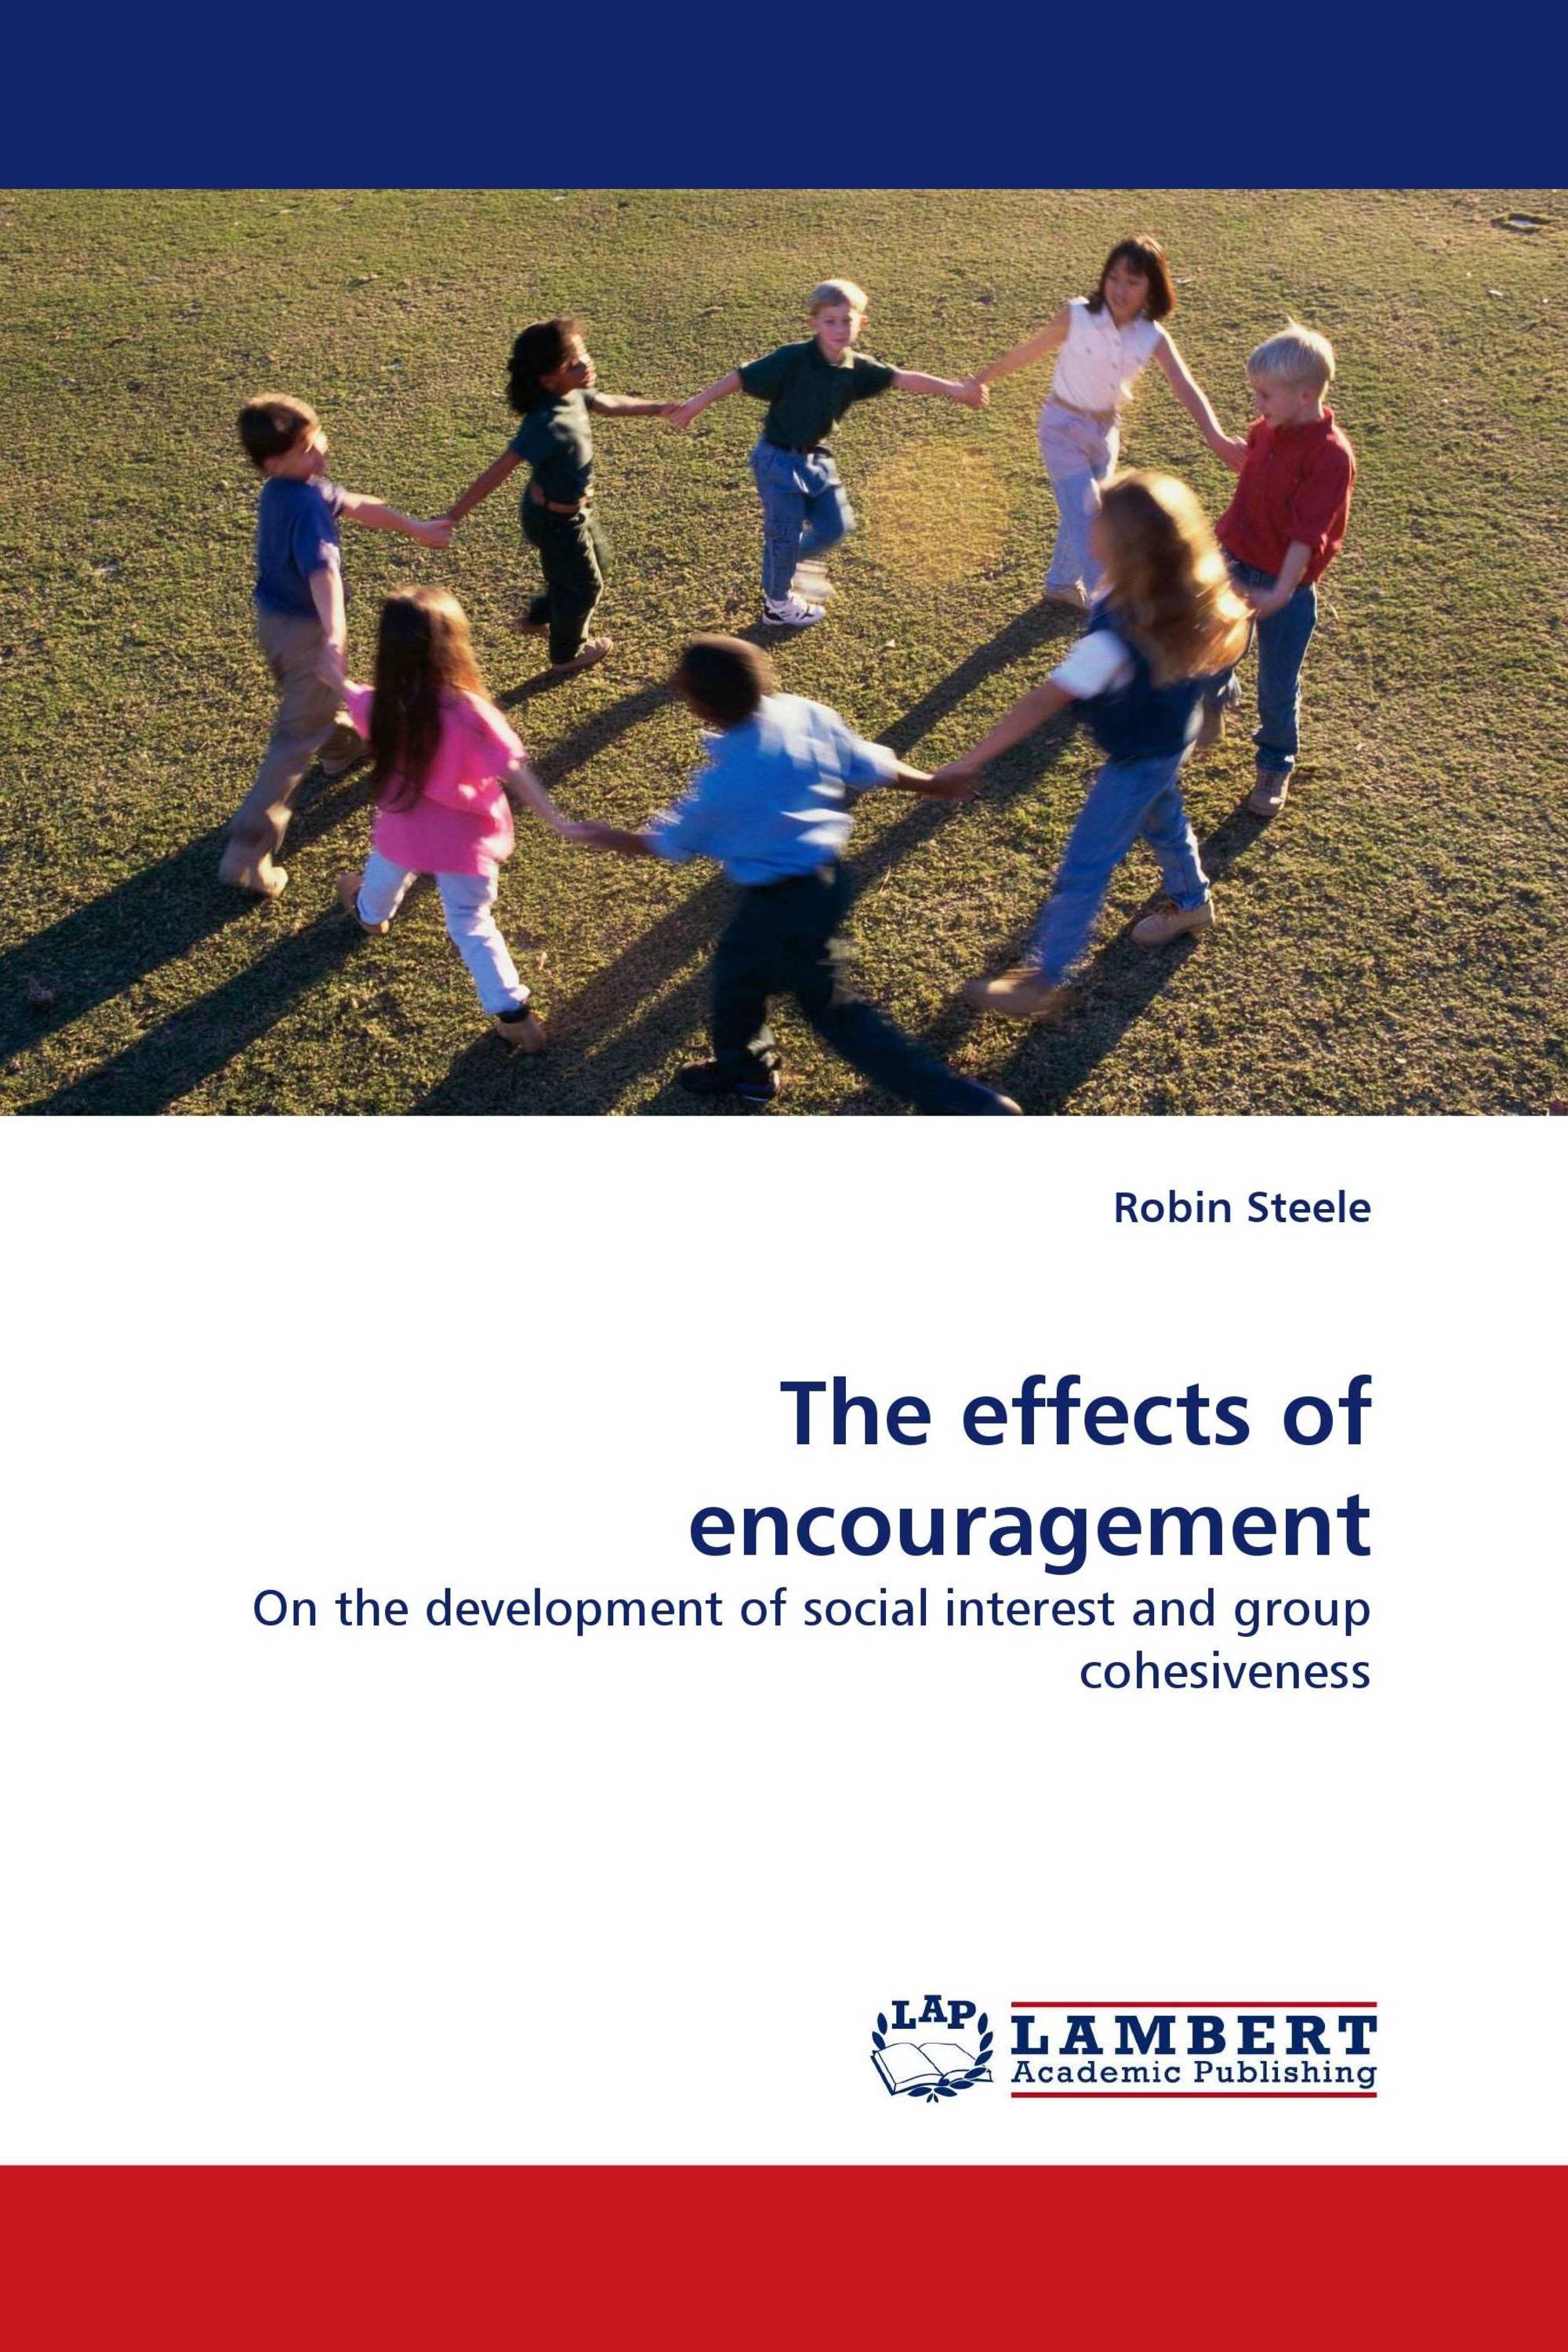 The effects of encouragement